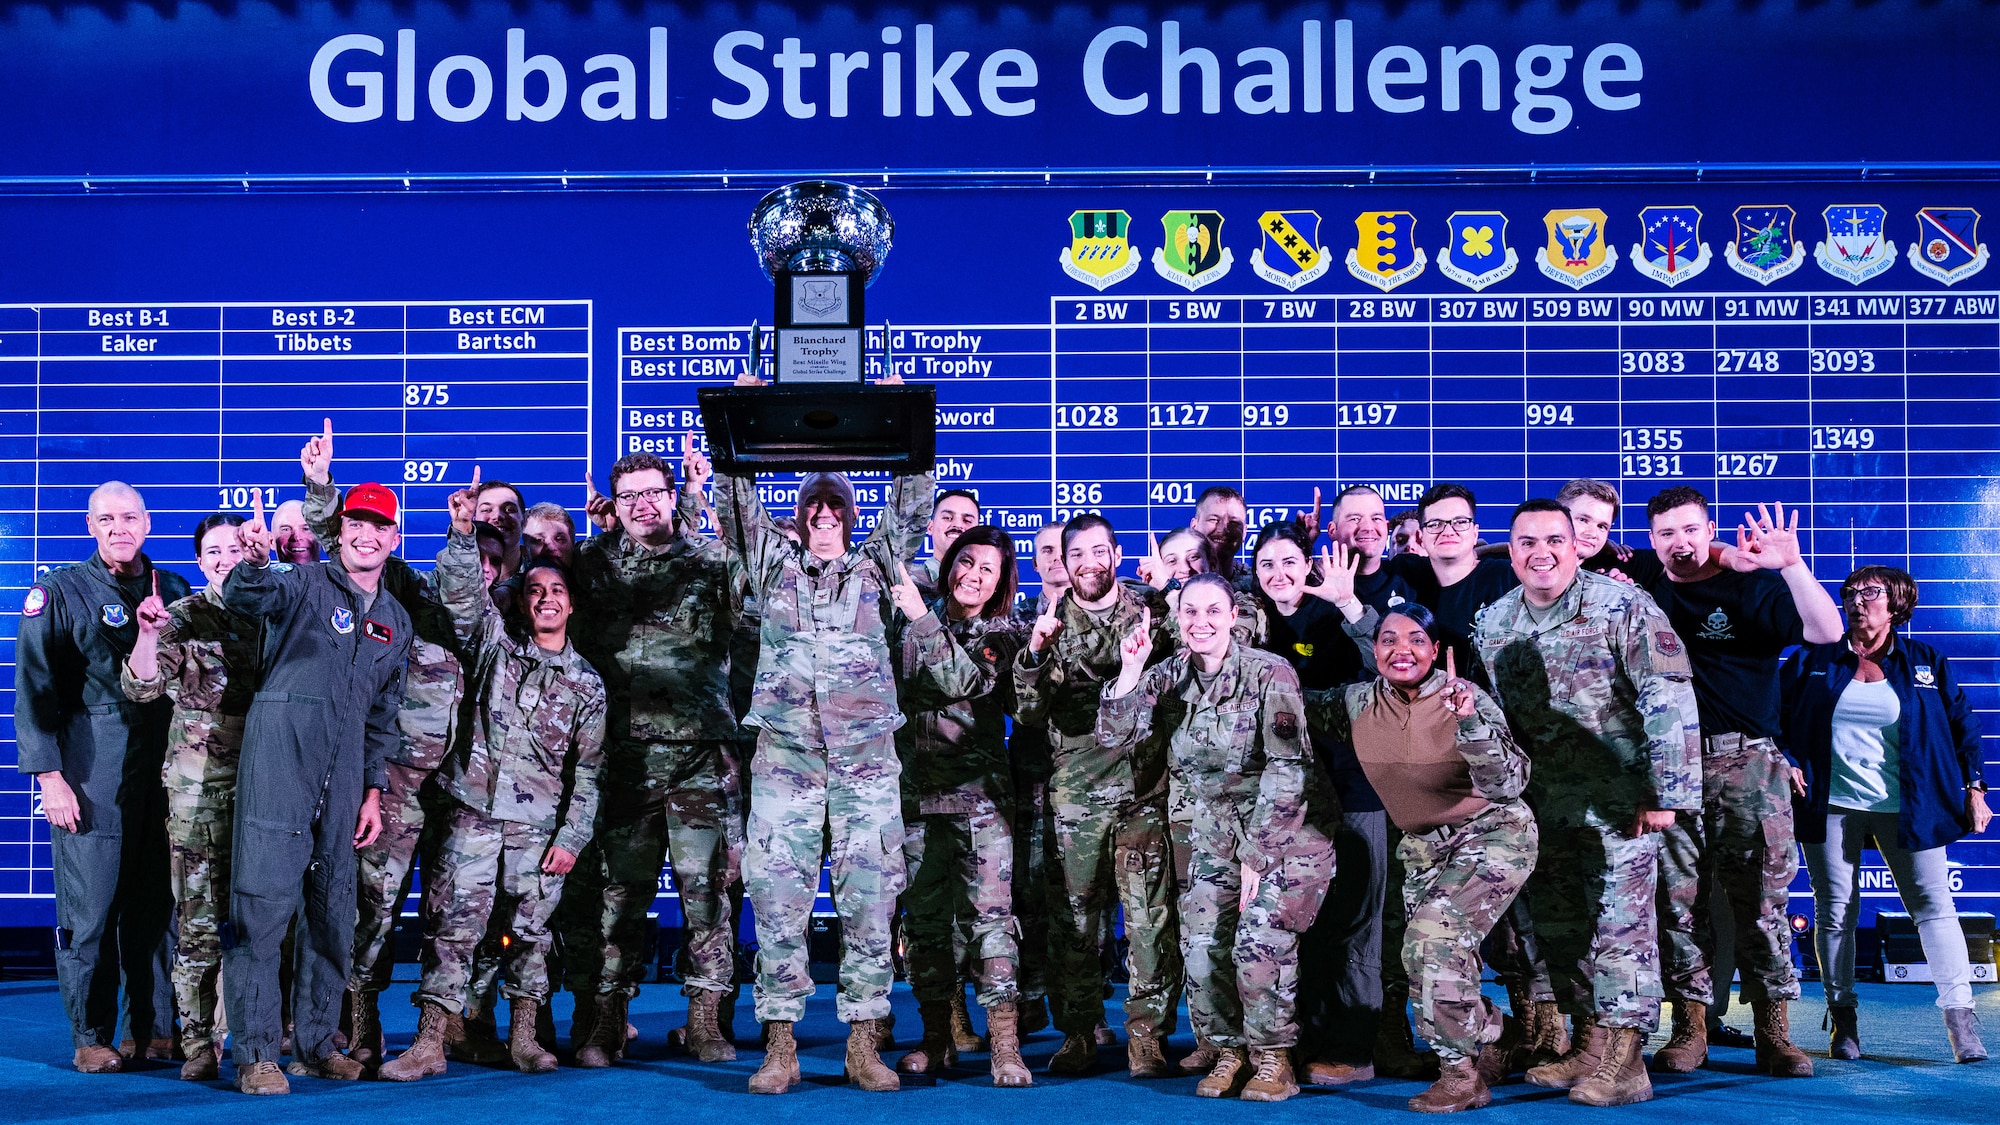 A large group photo of uniformed Air Force personnel who are celebrating by holding a large trophy up.